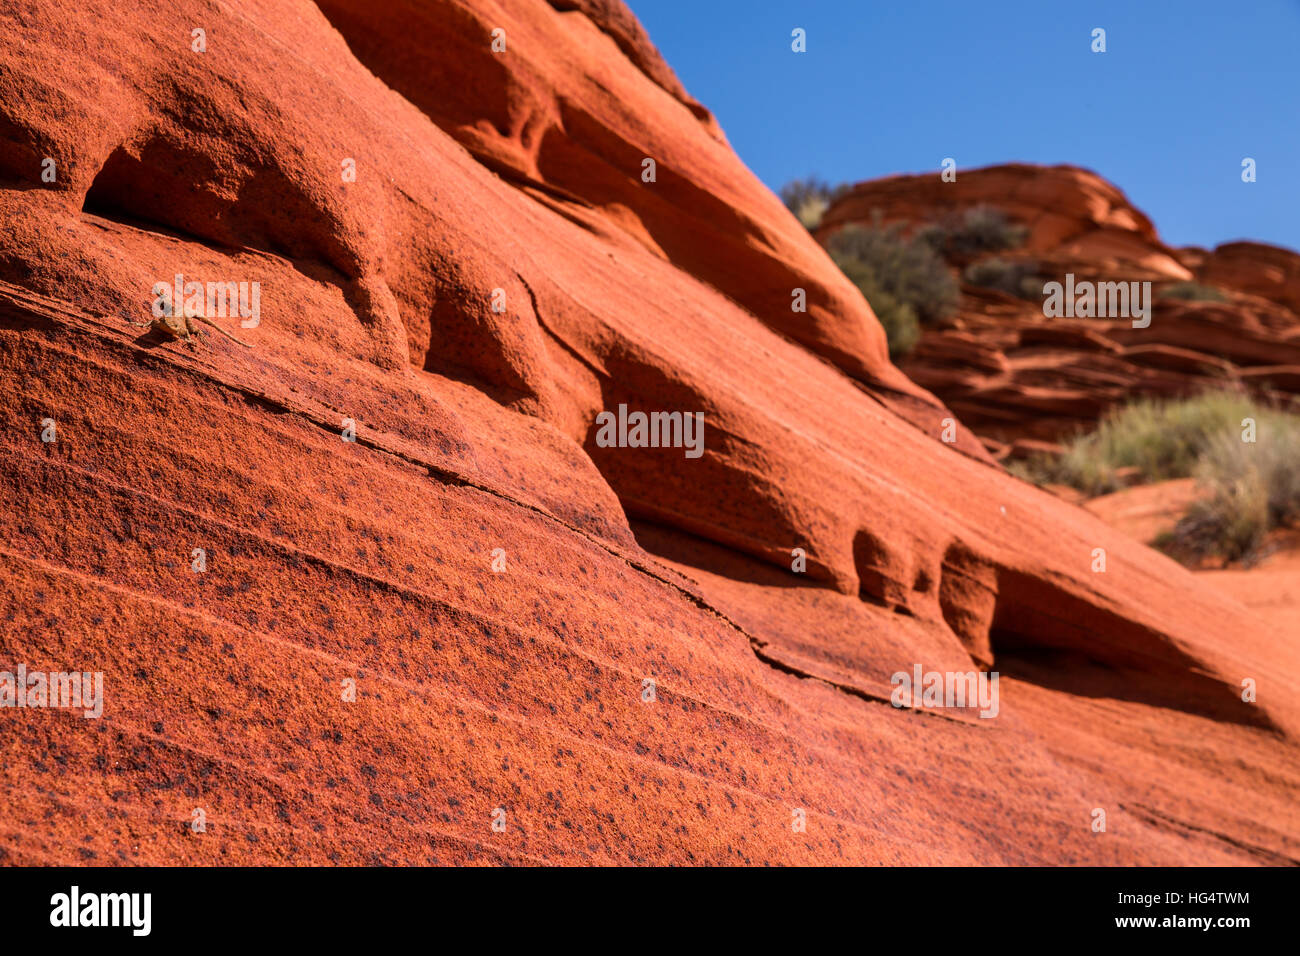 In this classic desert scene in Coyote Buttes of hte Utah Arizona border, a small lizard rests in the sunshine on a red sandstone rock face looking to Stock Photo